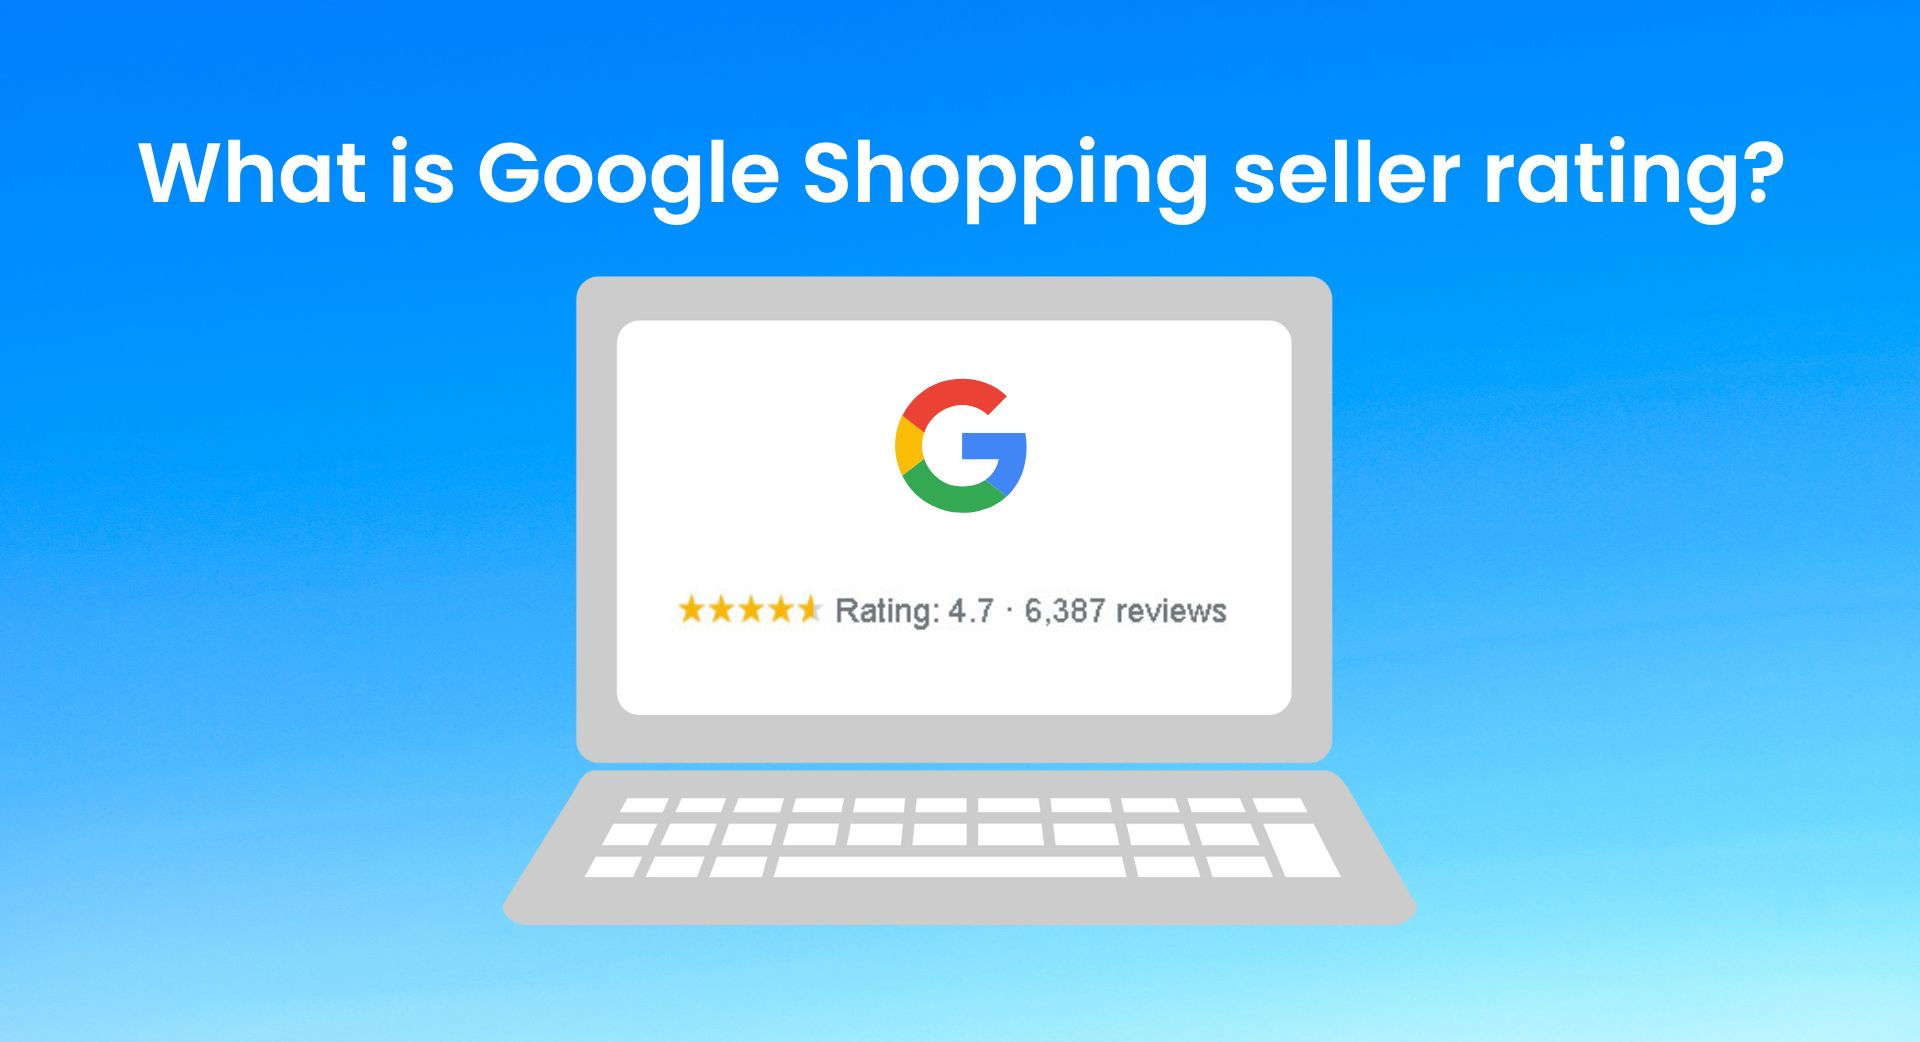 What is Google Shopping seller rating?